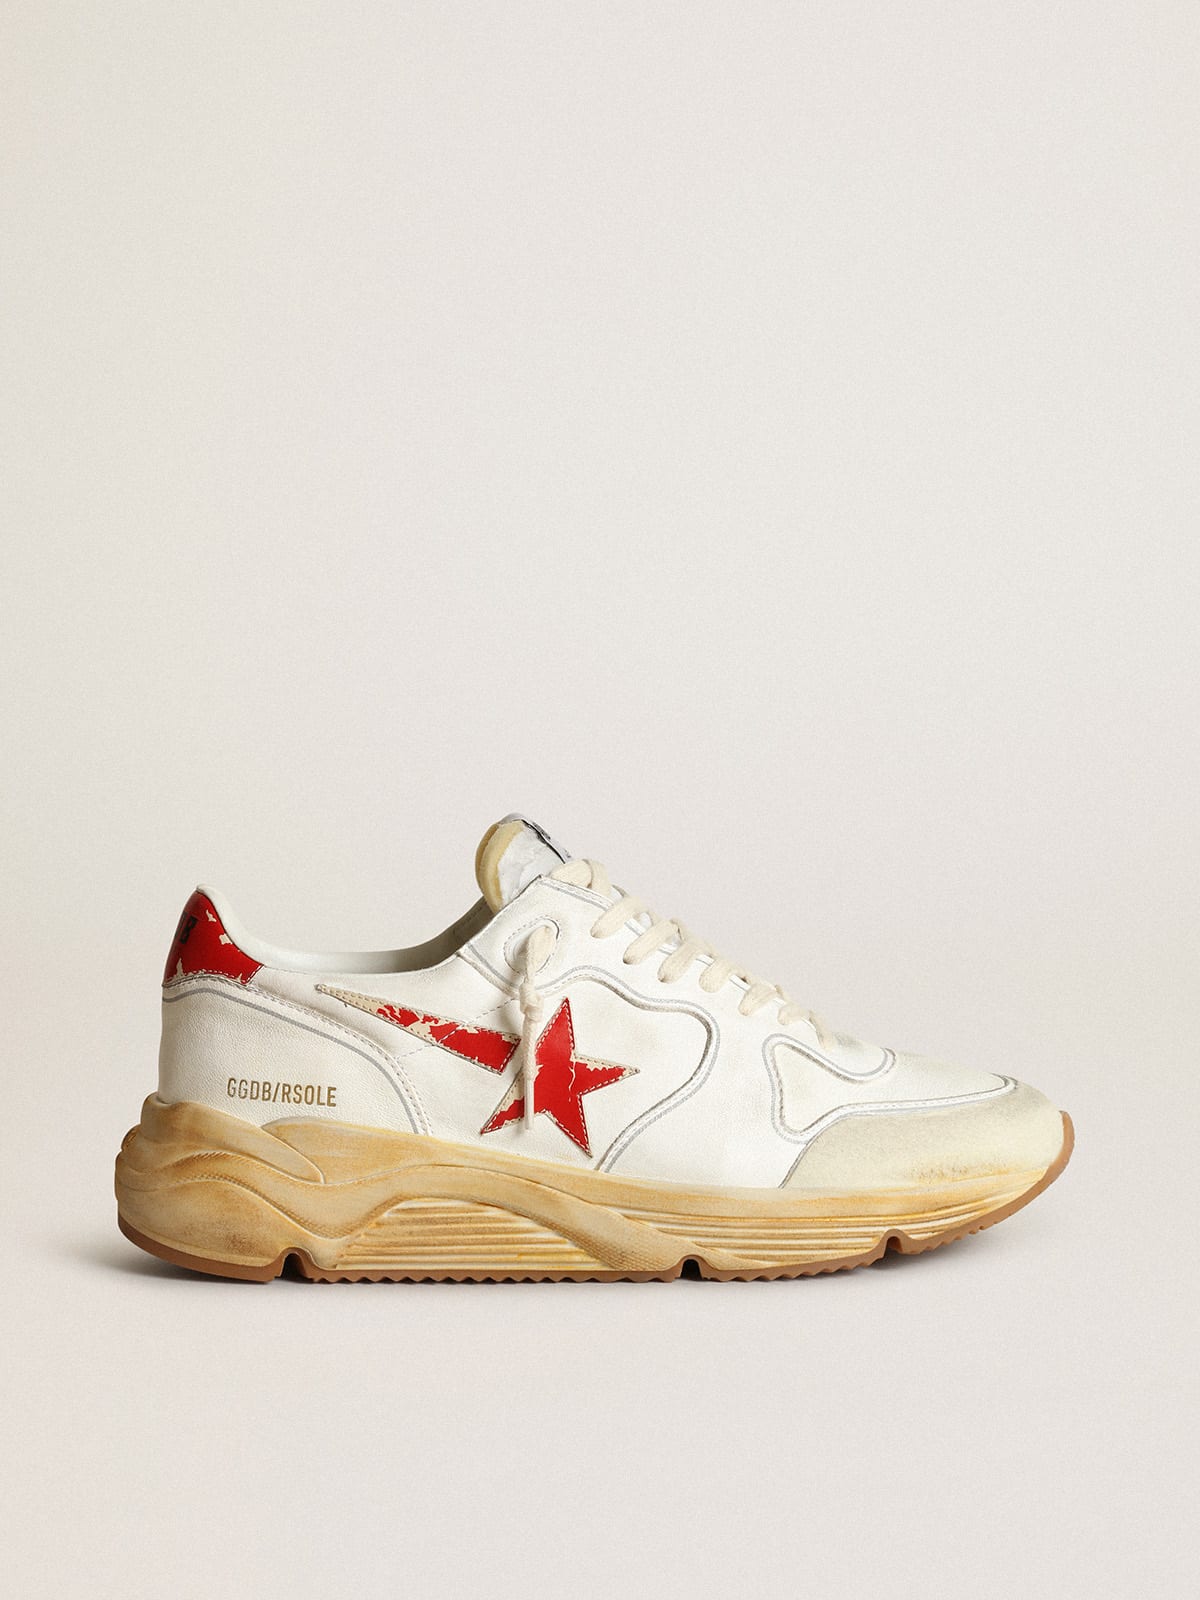 Golden Goose - Men's Running Sole with leather star and heel tab with red print in 